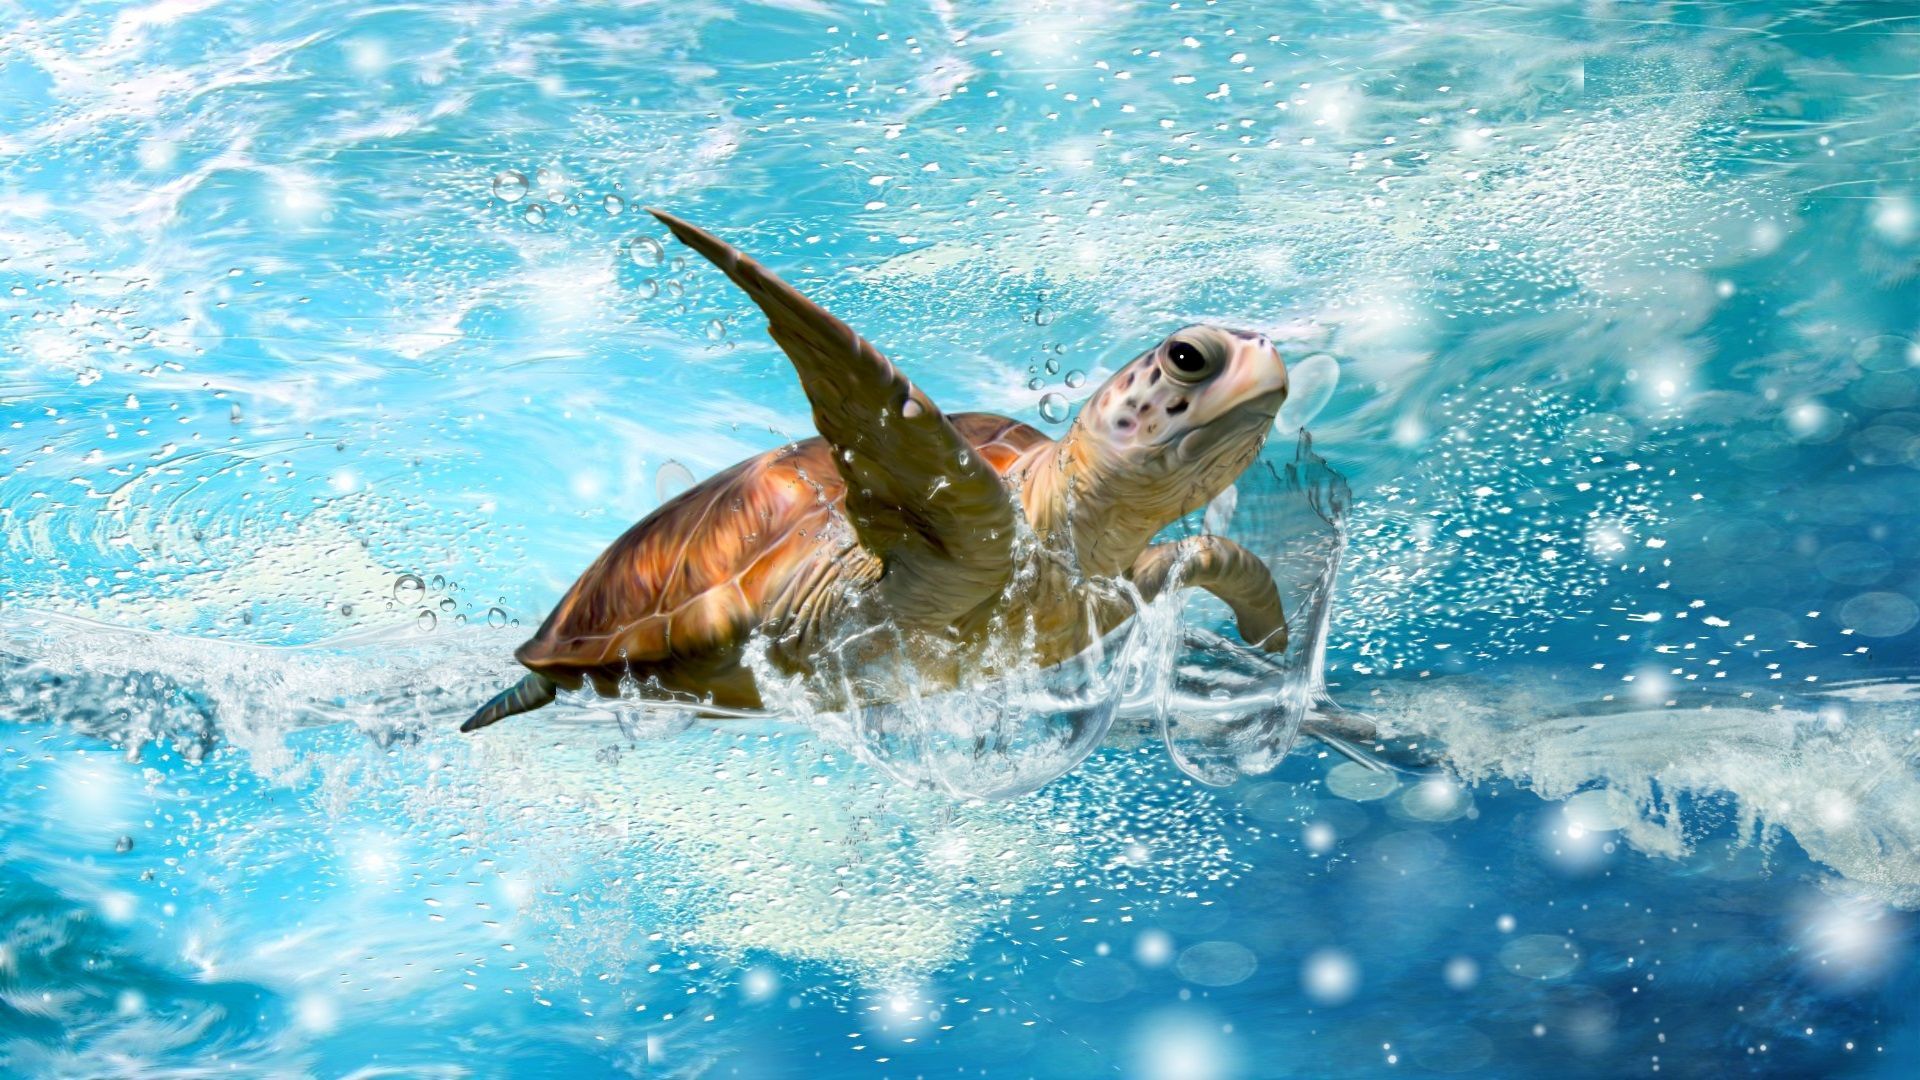 6 Sea Turtle HD Wallpapers Backgrounds - Wallpaper Abyss